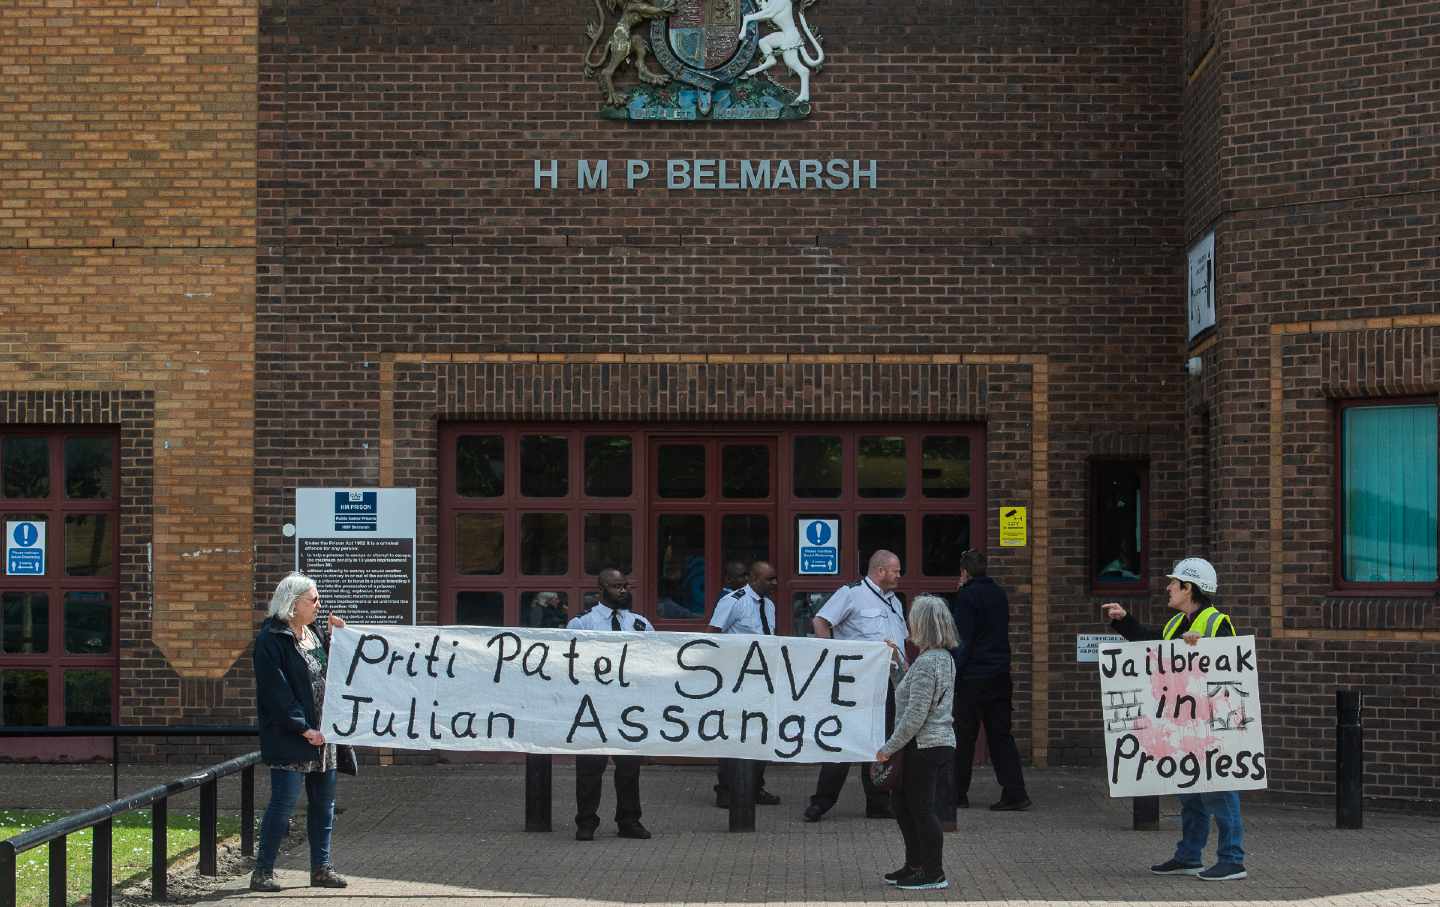 Protesters hold banners in support of Julian Assange at Belmarsh Prison on May 12, 2022, in London, England.